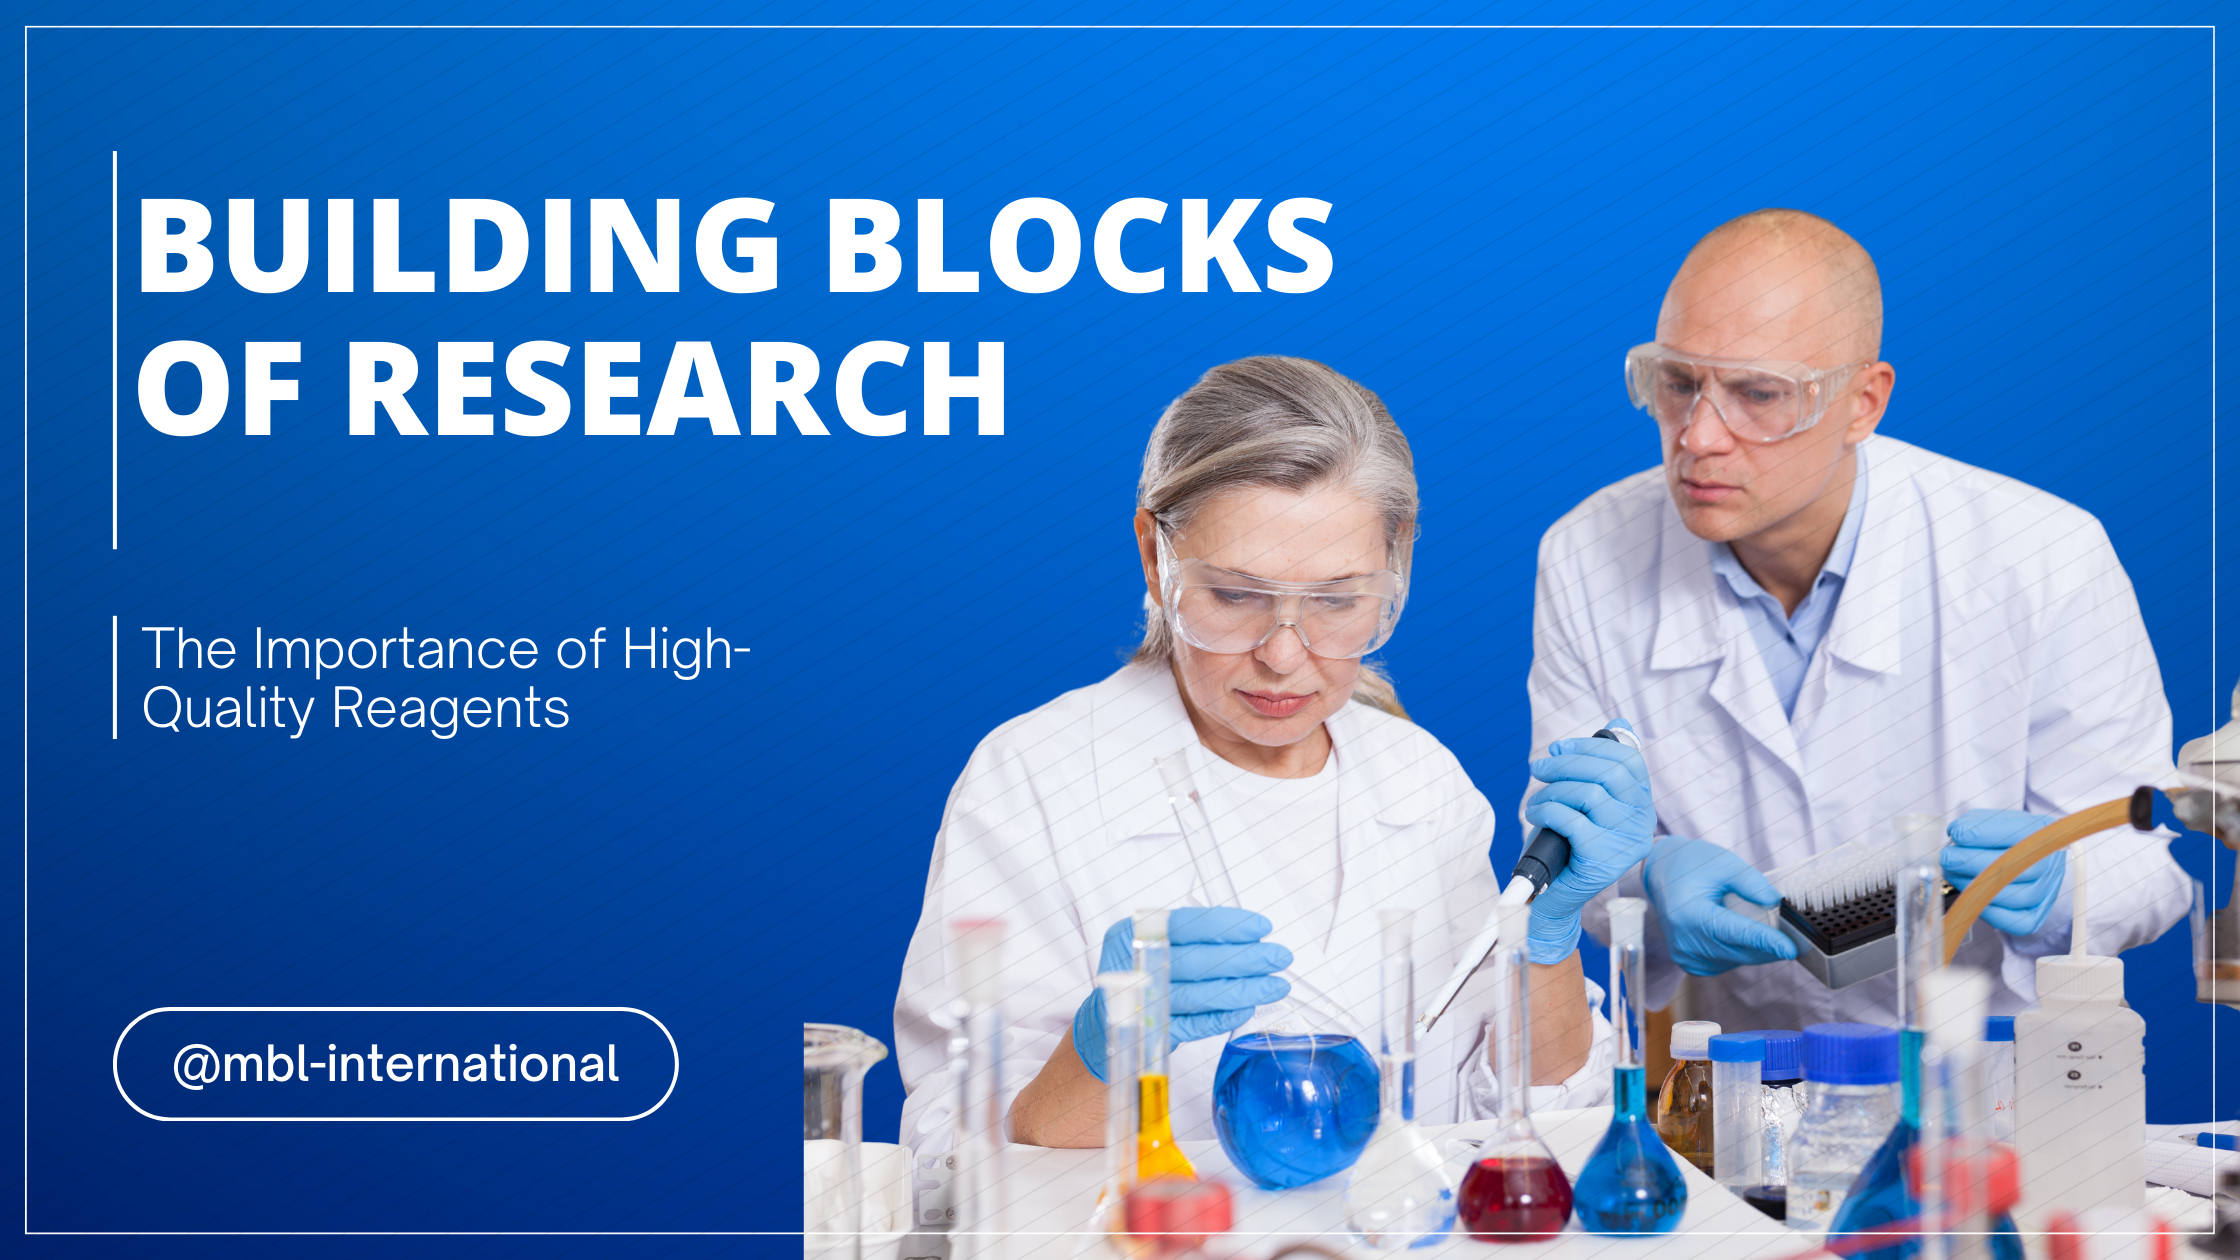 Building Blocks of Research: The Importance of High-Quality Reagents